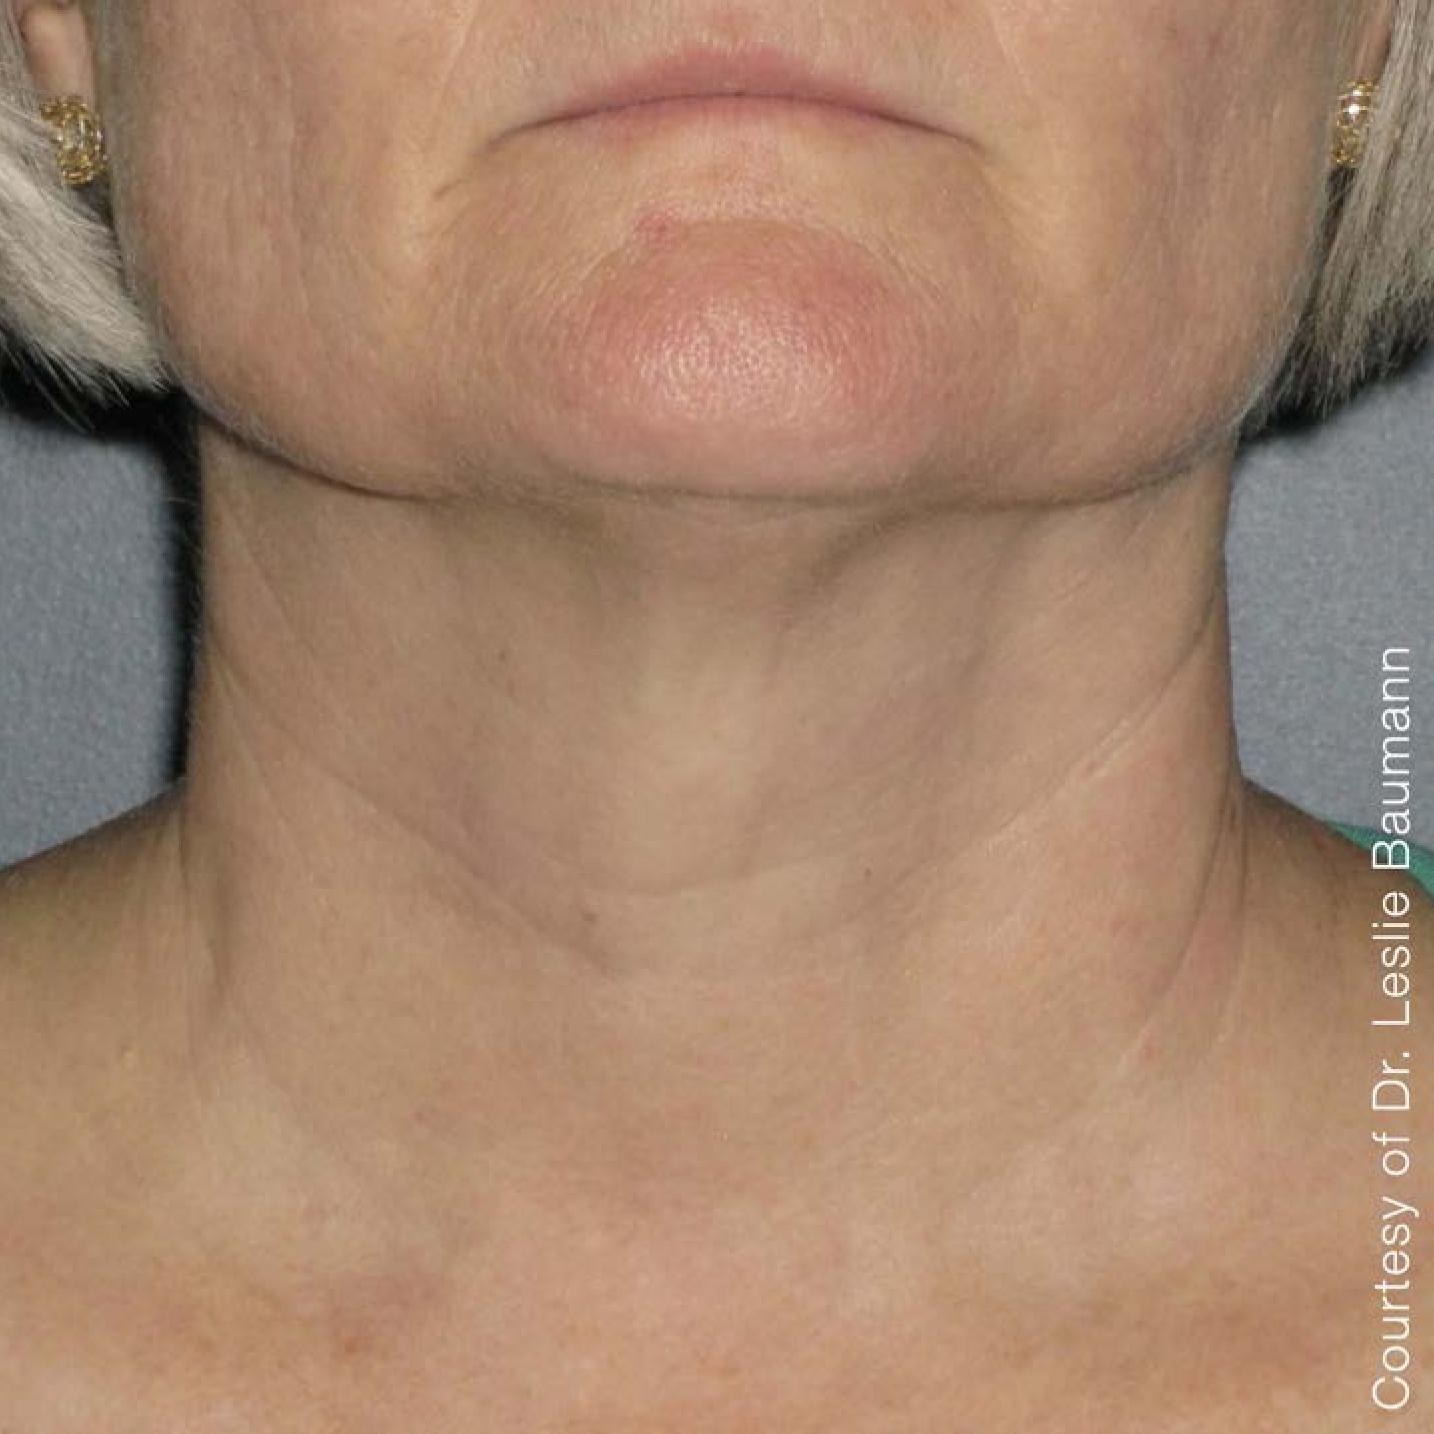 Ultherapy® - Neck: Patient 1 - After 